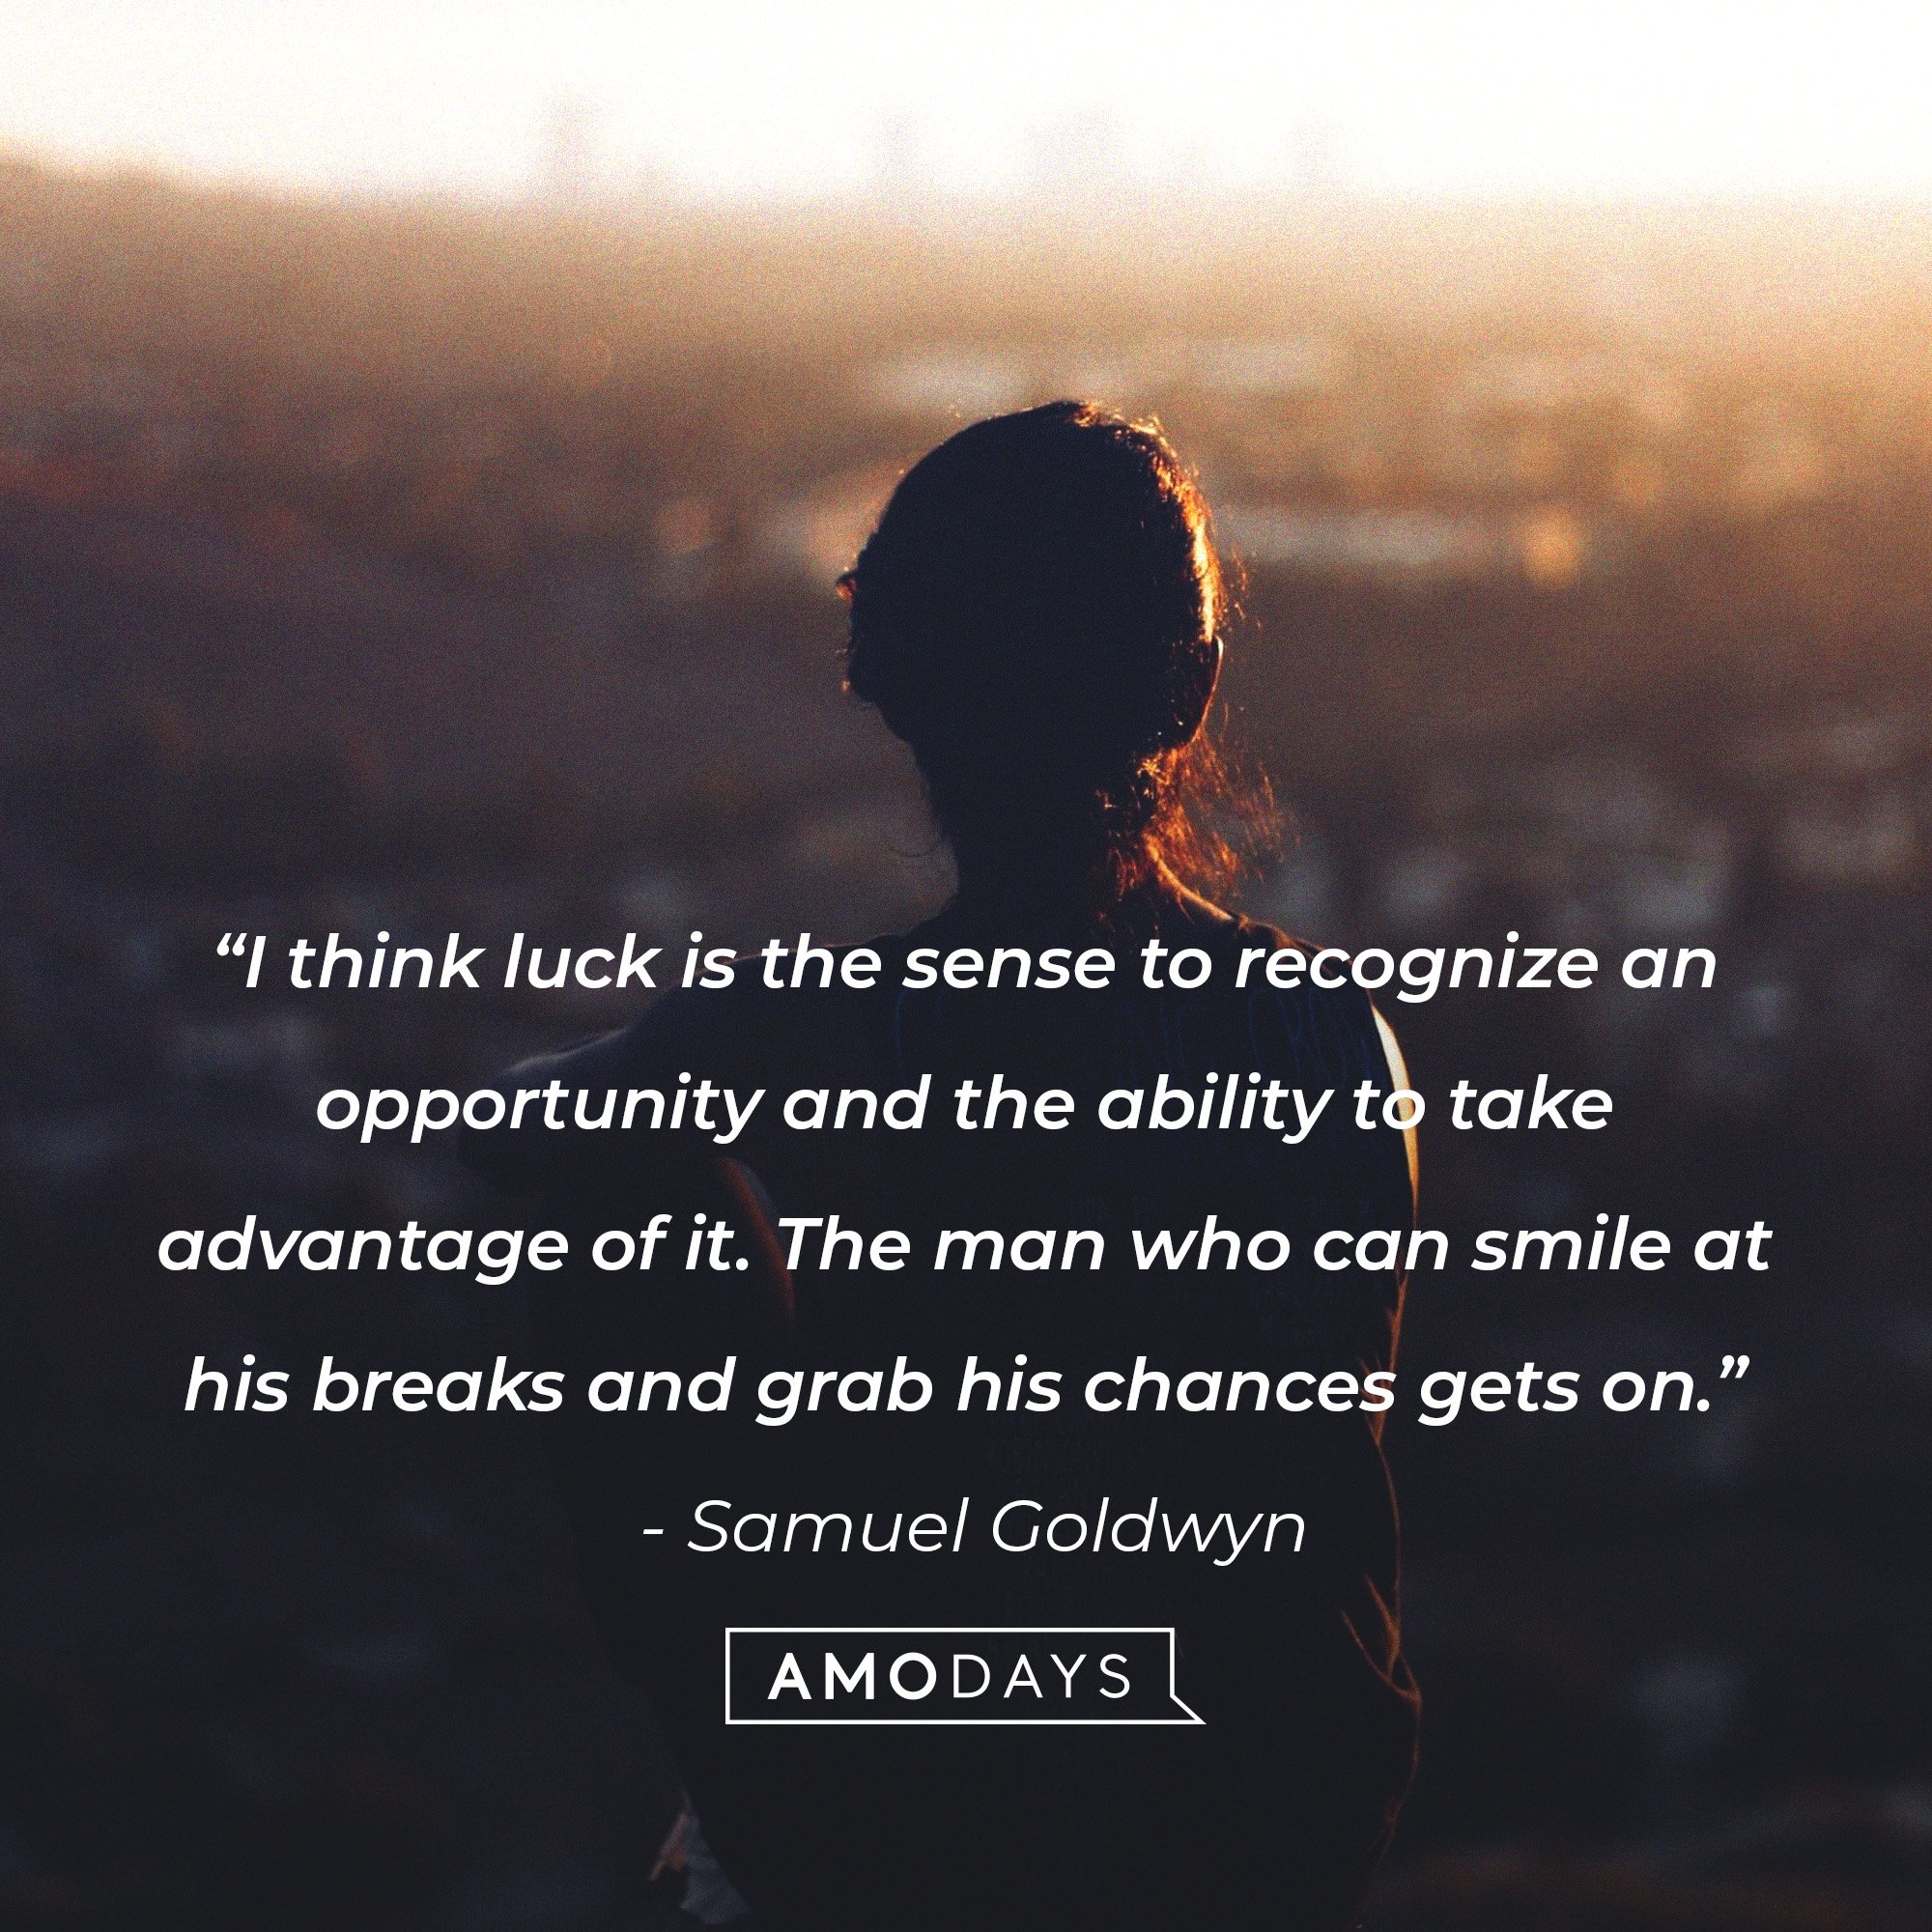 Samuel Goldwyn's quote: “I think luck is the sense to recognize an opportunity and the ability to take advantage of it. The man who can smile at his breaks and grab his chances gets on.” | Image: AmoDays